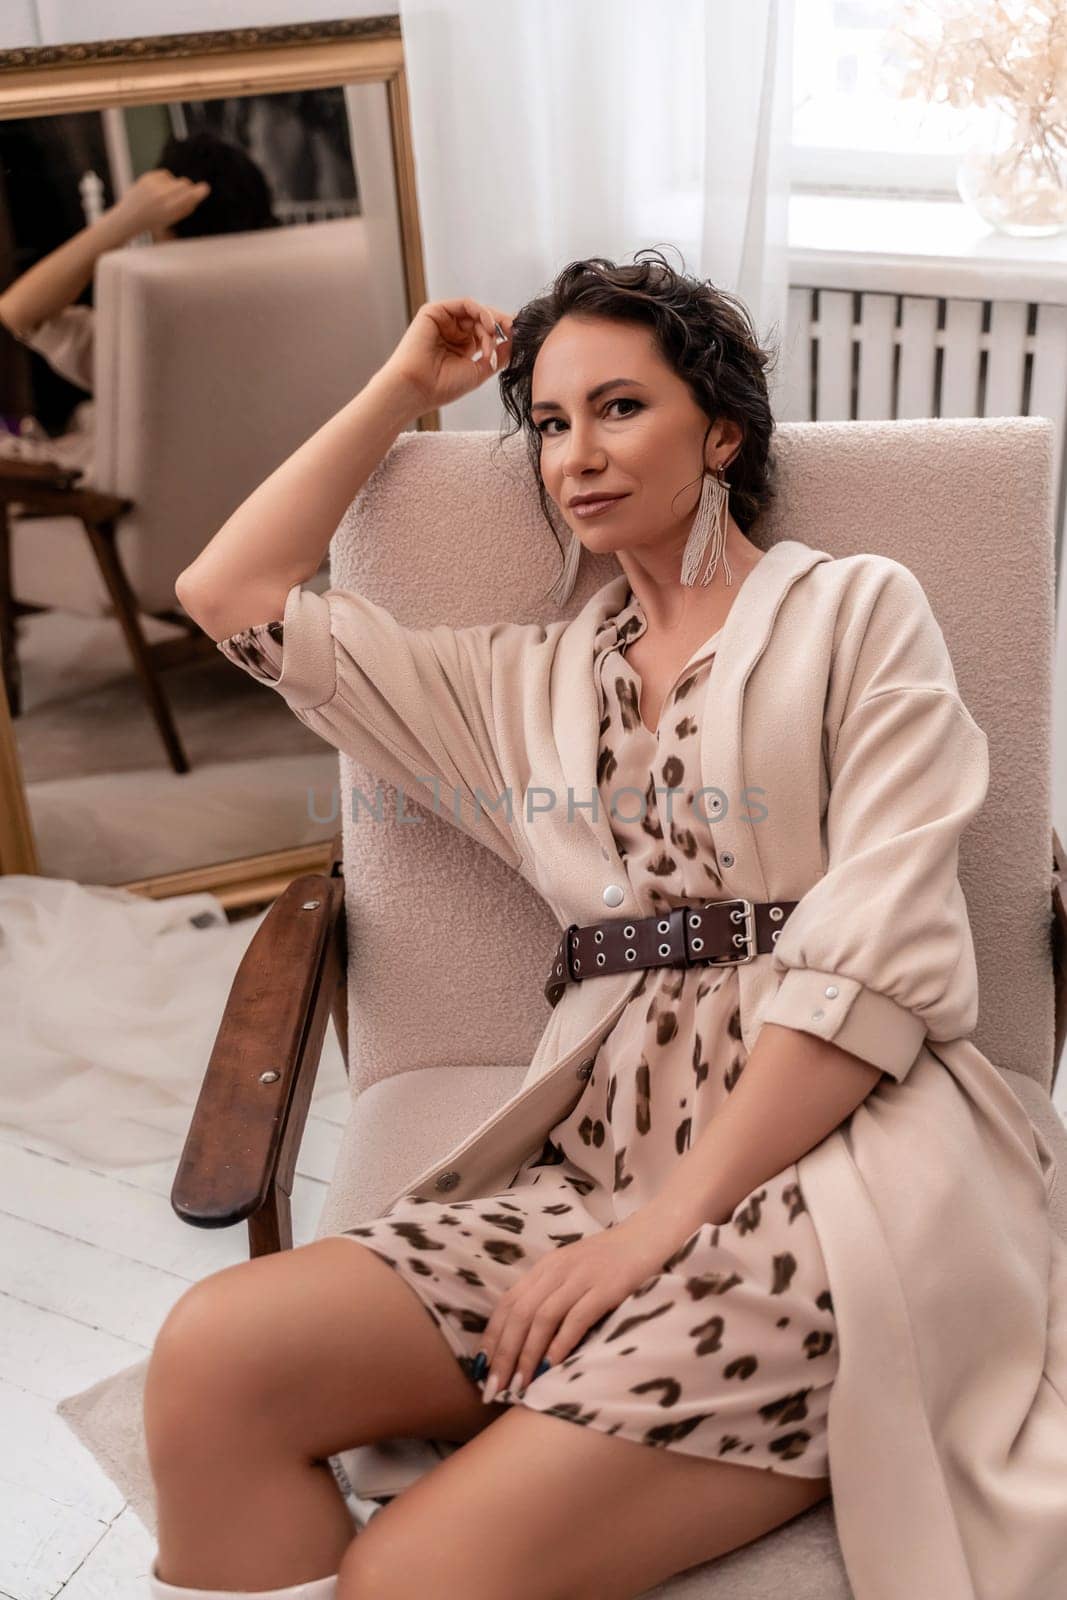 A woman is sitting in a chair wearing a tan jacket and a leopard print dress. She is wearing a belt and earrings